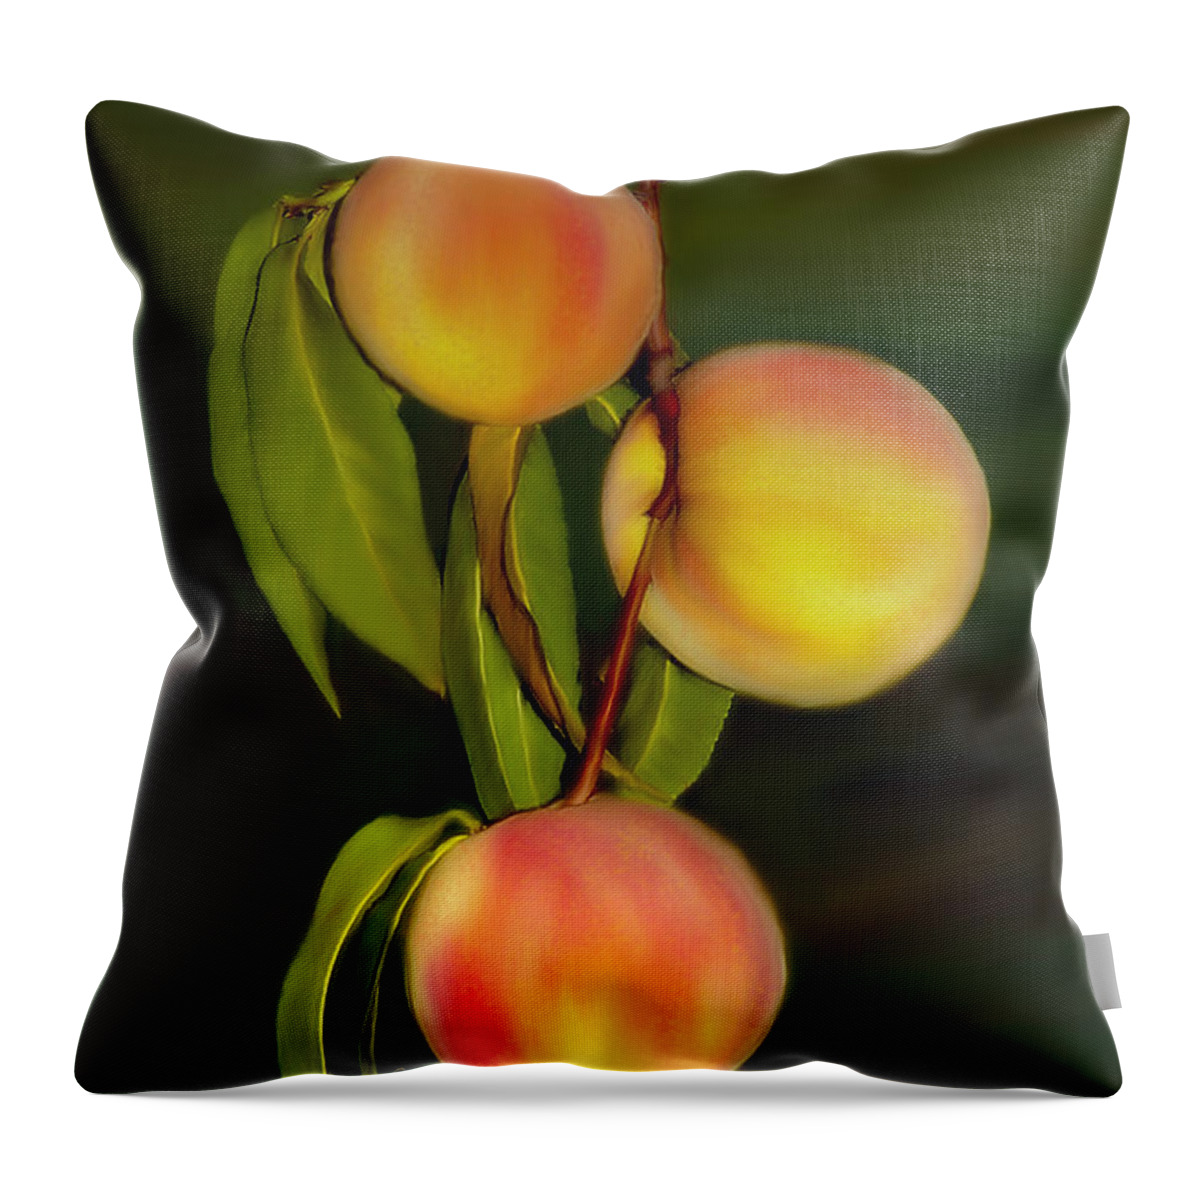 Portrait Throw Pillow featuring the photograph Fresh fruit by Sami Martin